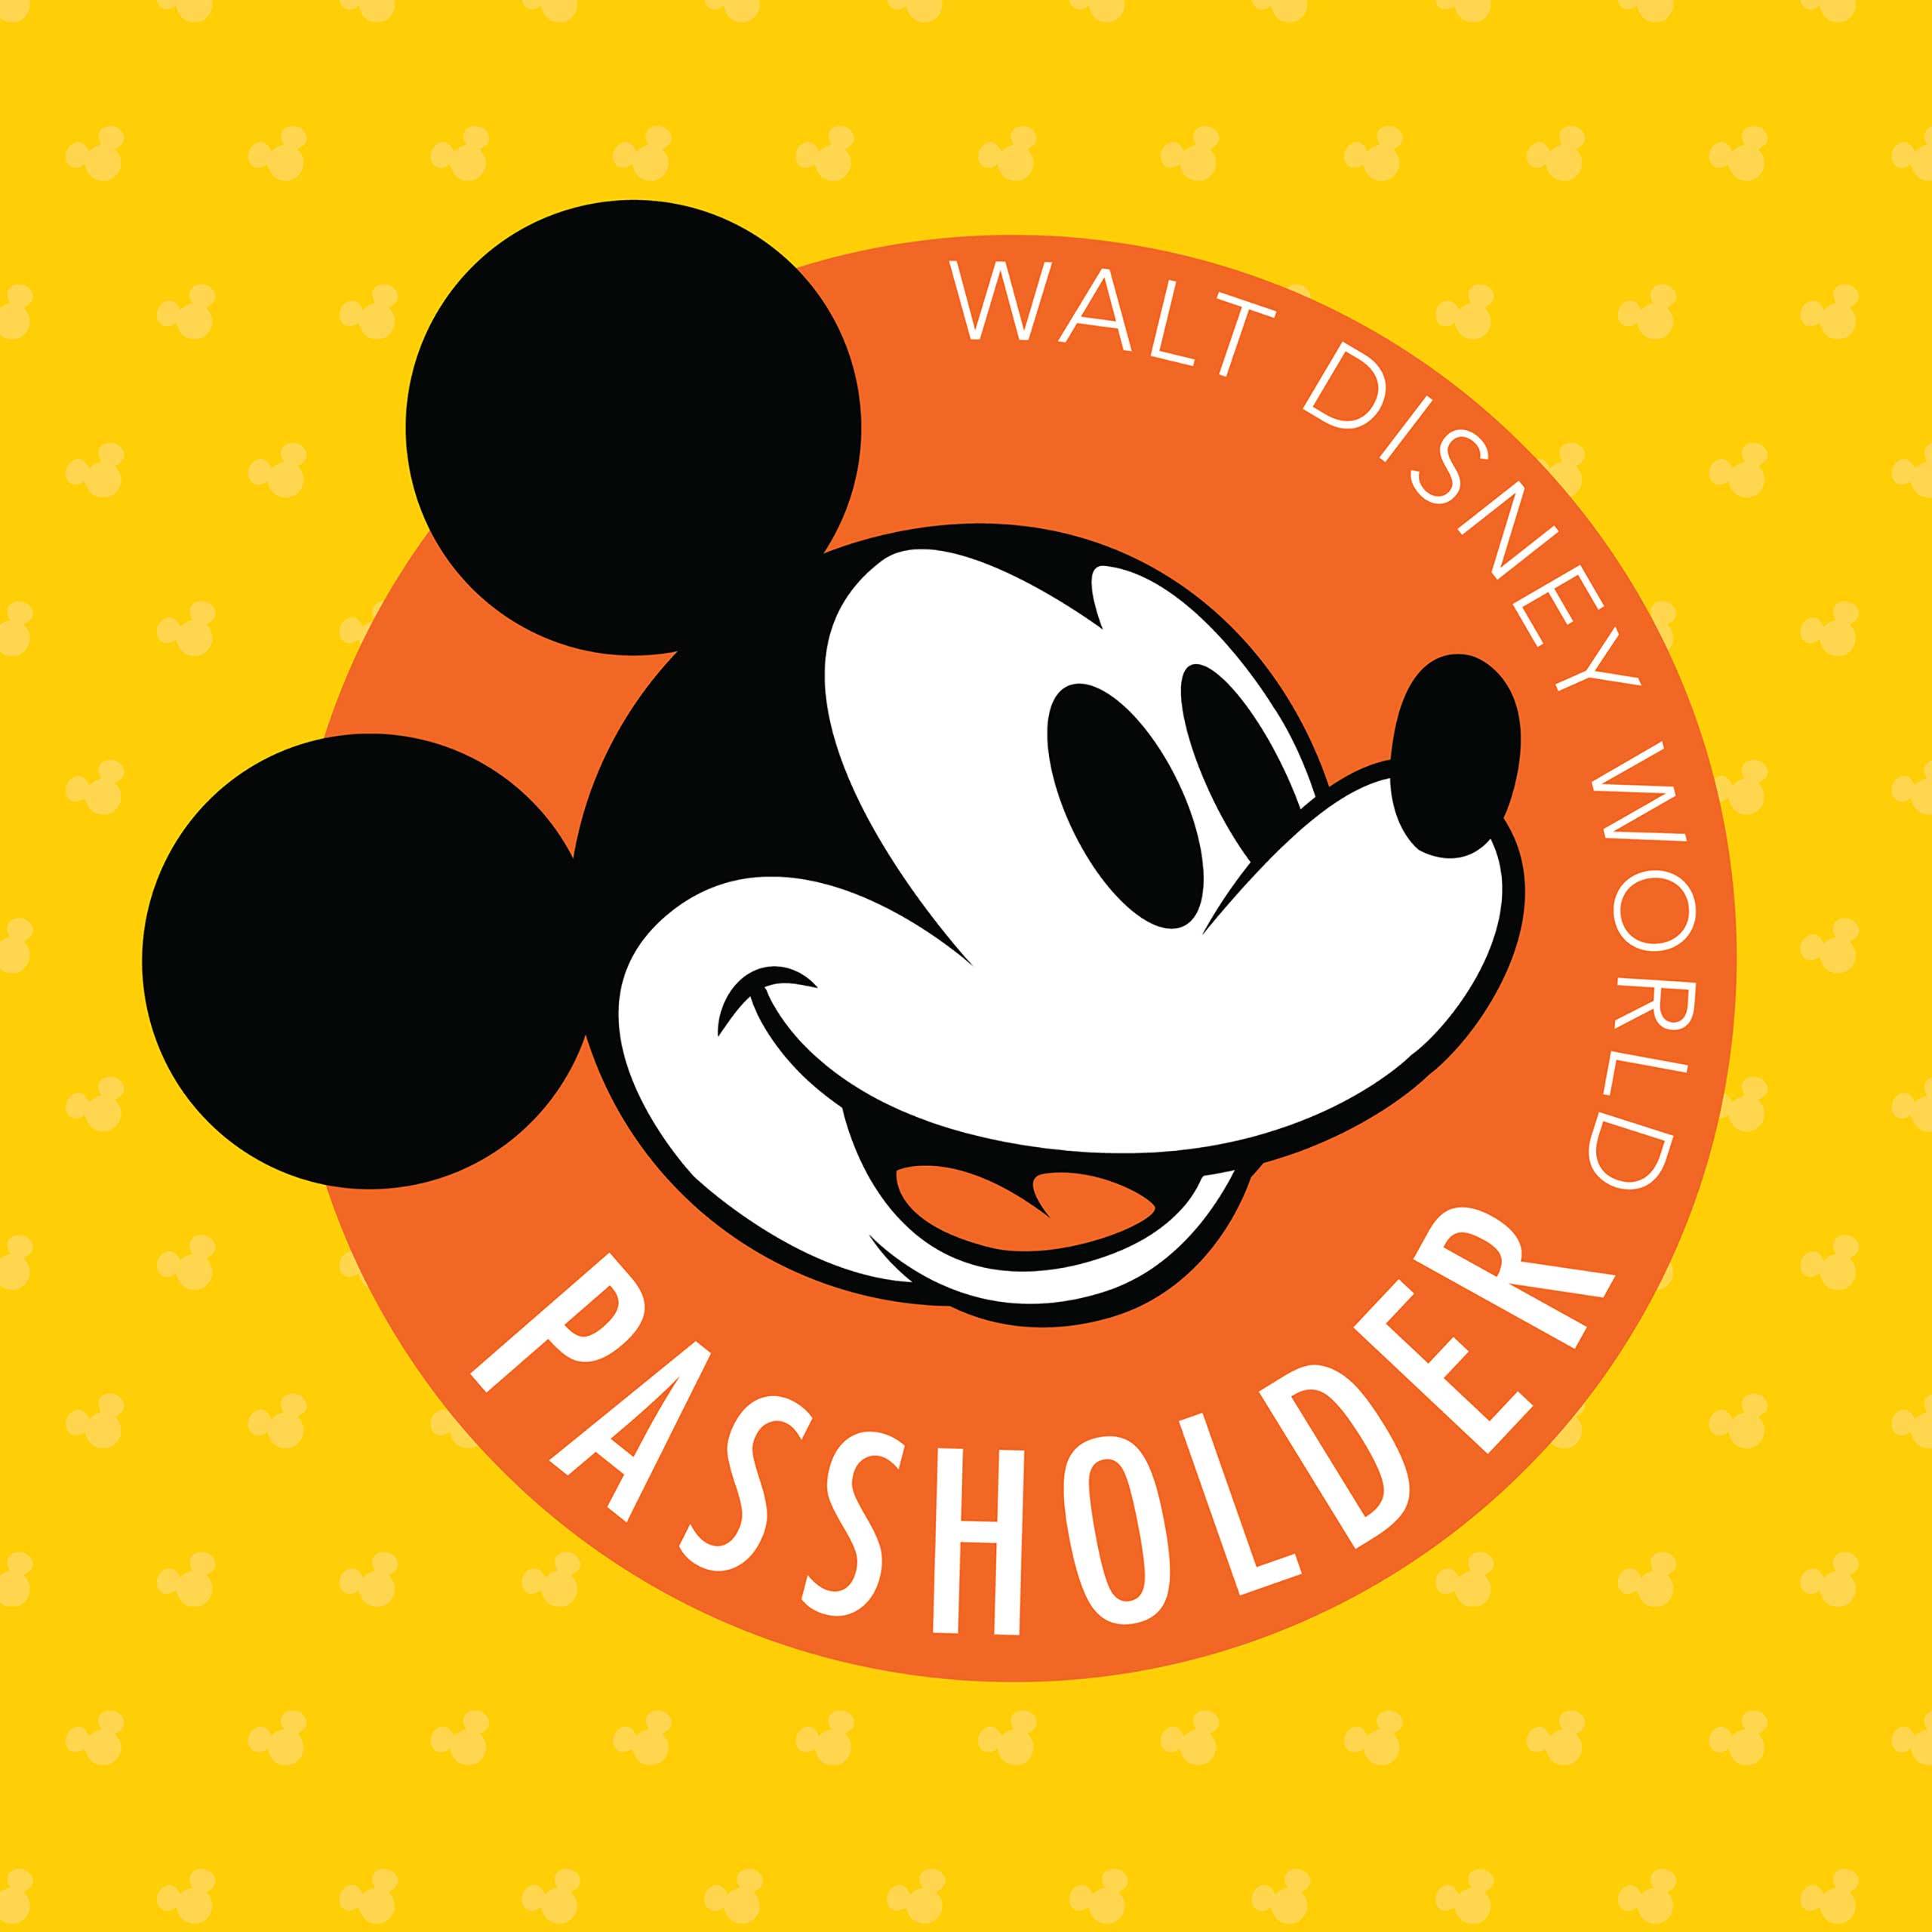 Annual Passholder dining discount drops to 10% for 2018